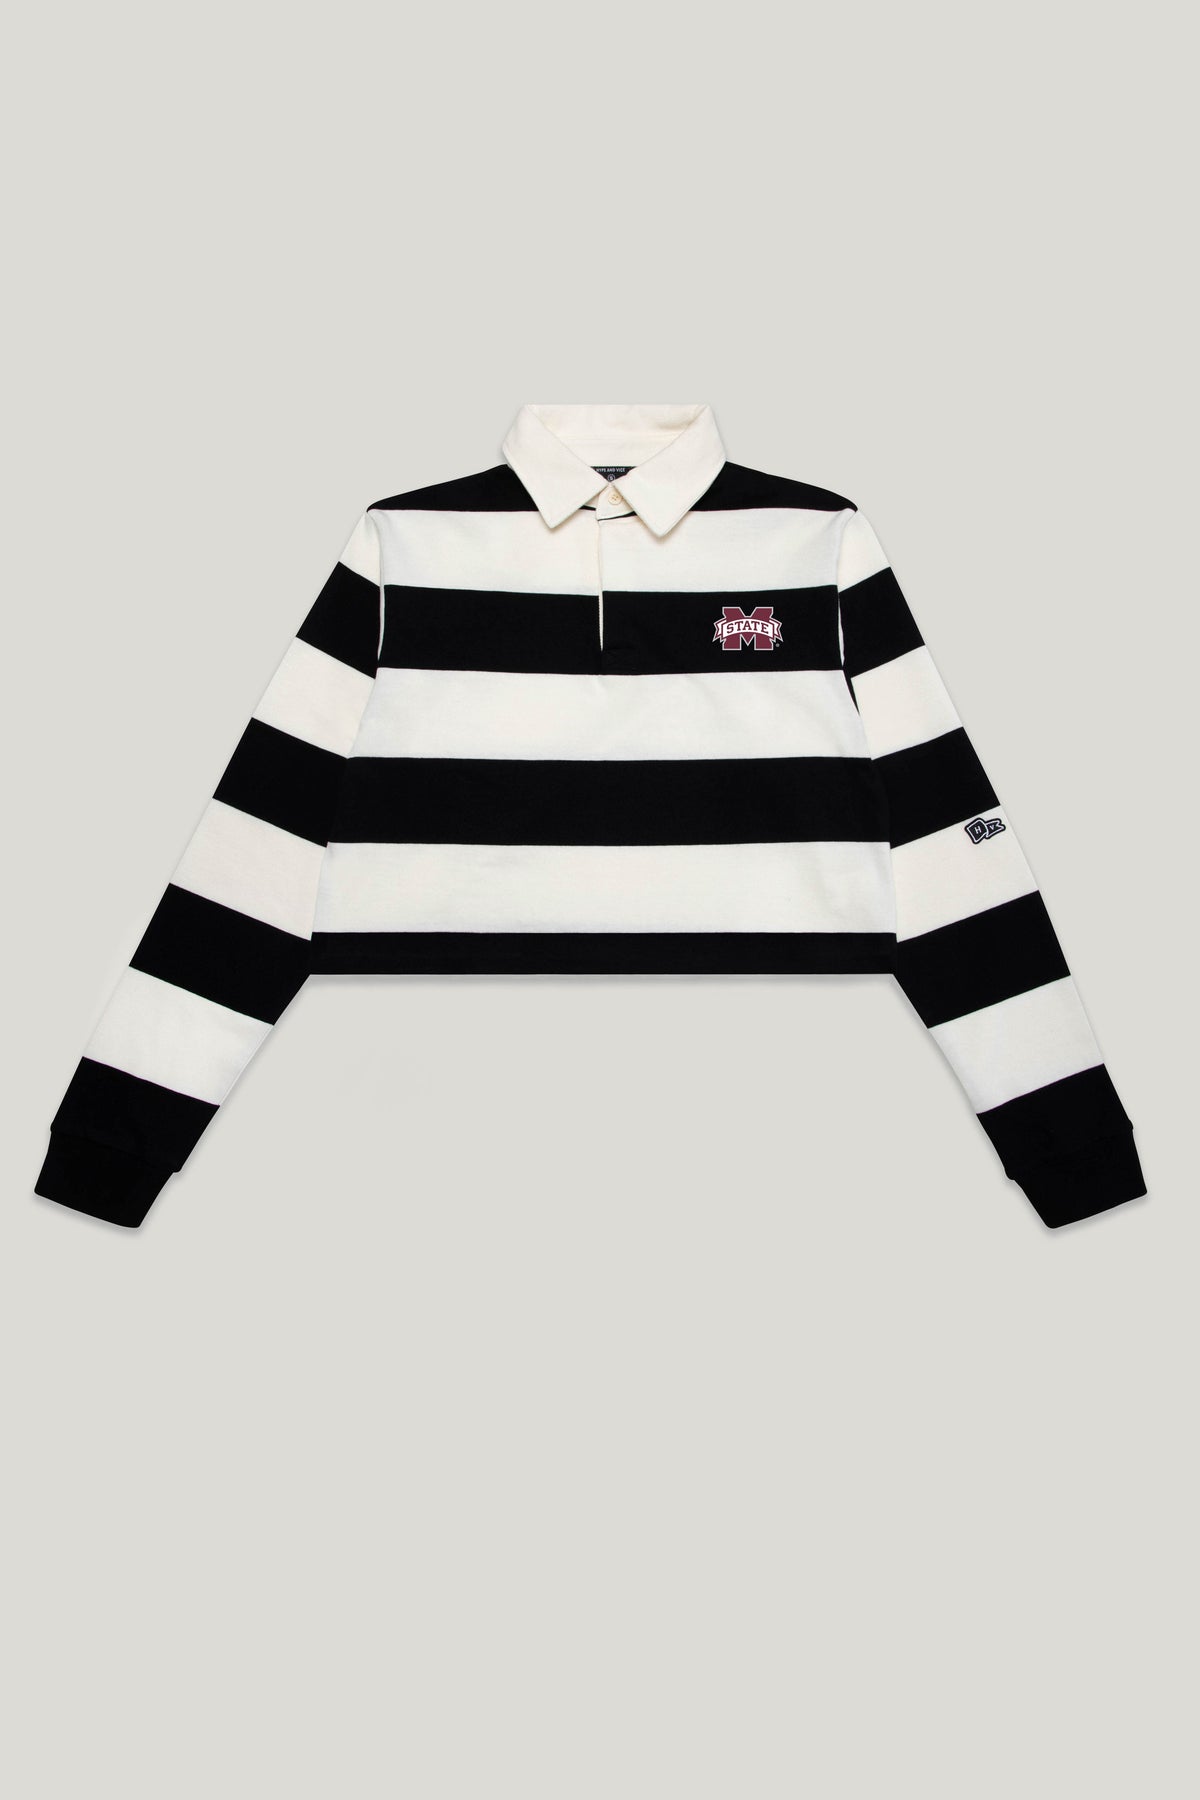 Mississippi State Rugby Top